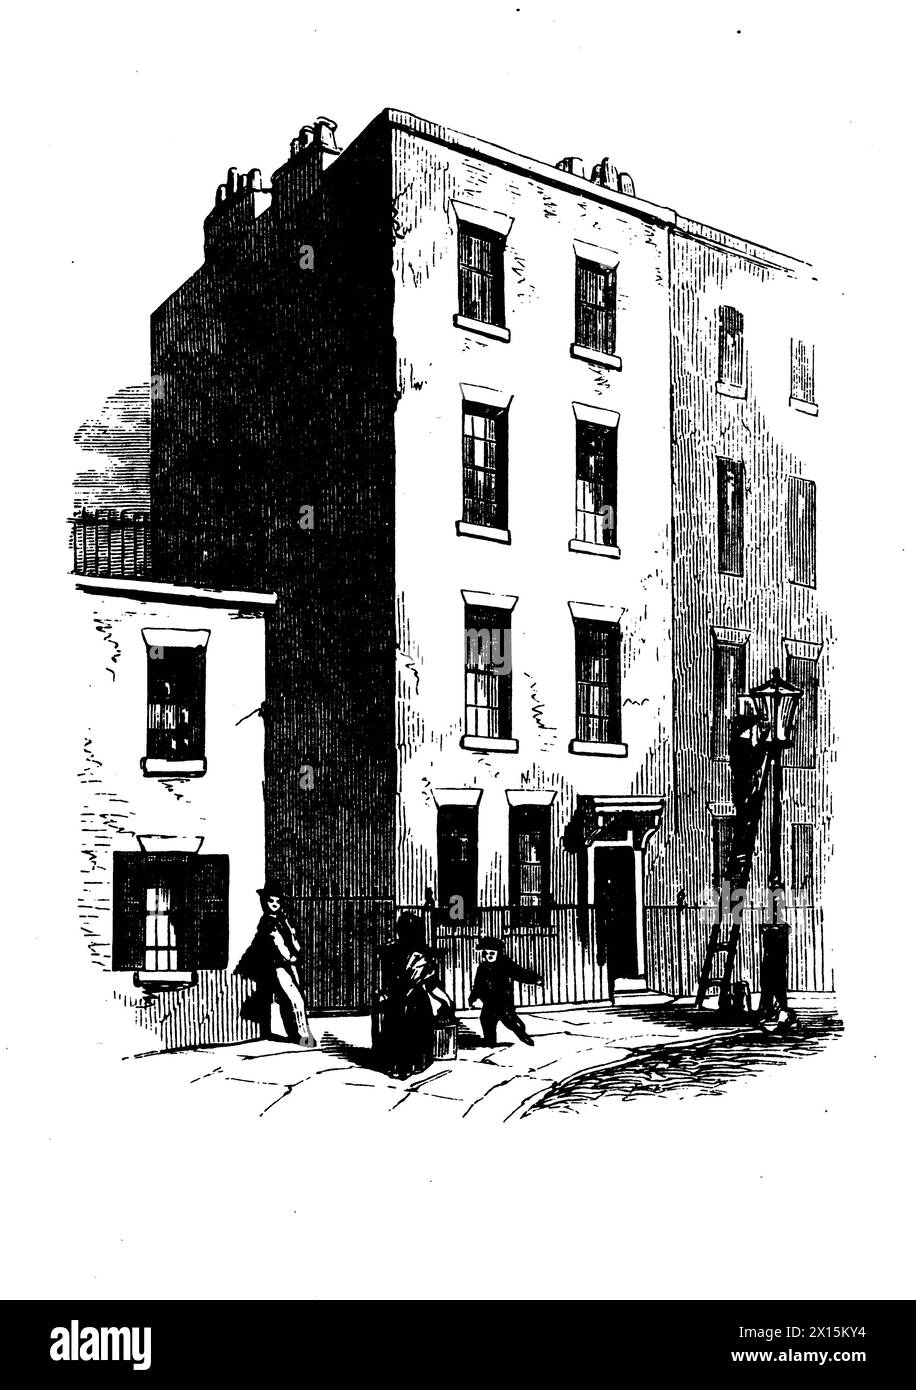 A historic 19th century illustration in black and white of a town house. Stock Photo